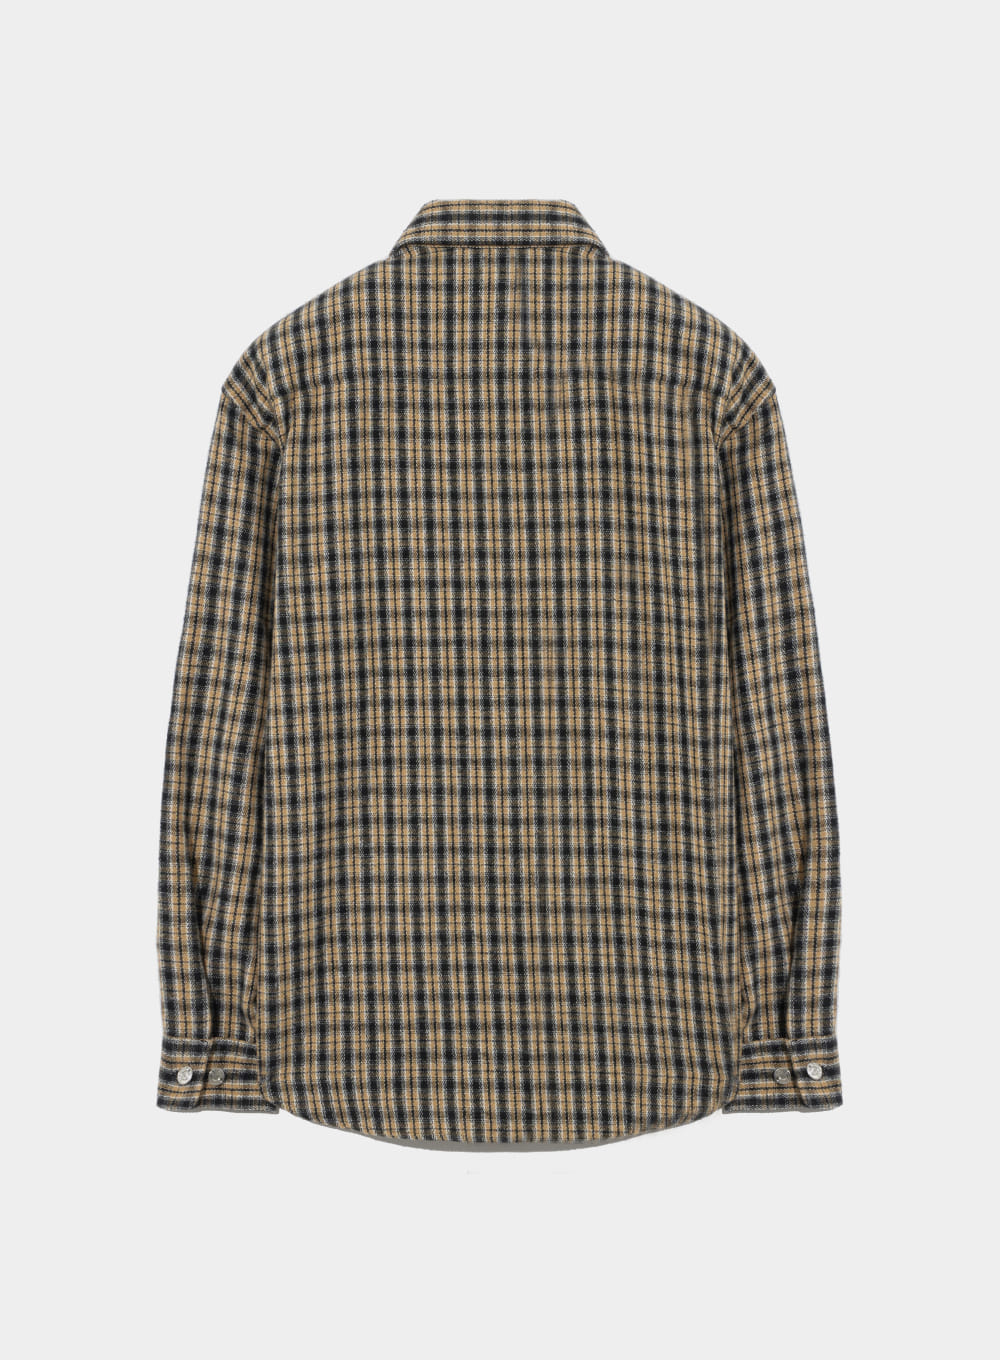 Double Pocket Flannel Check Shirts - Sunset Black